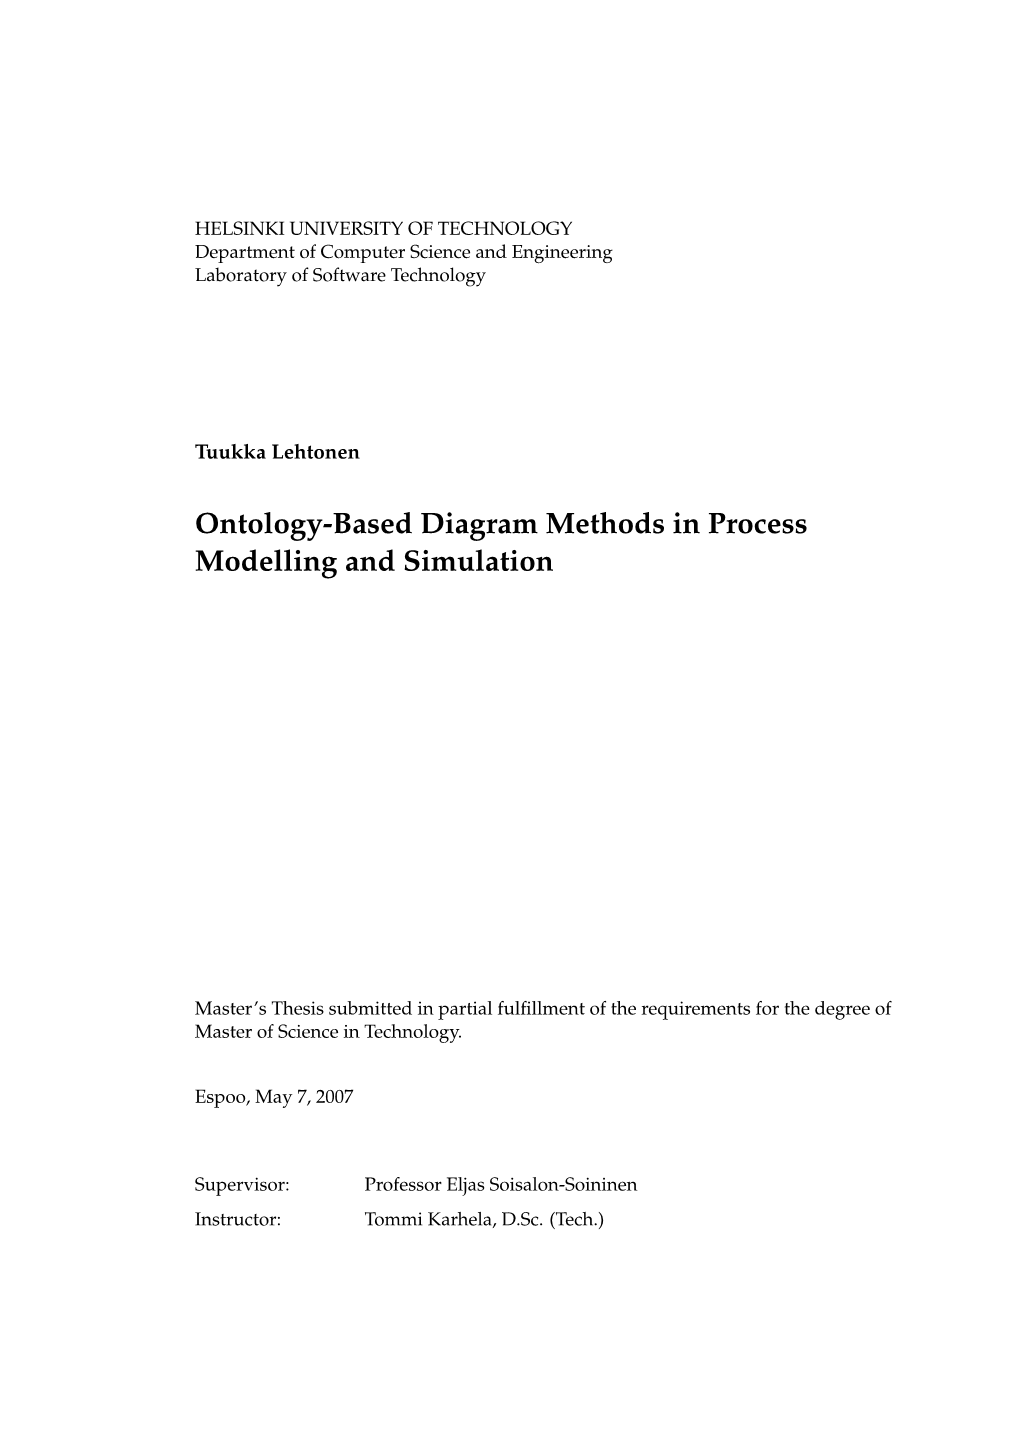 Ontology-Based Diagram Methods in Process Modelling and Simulation